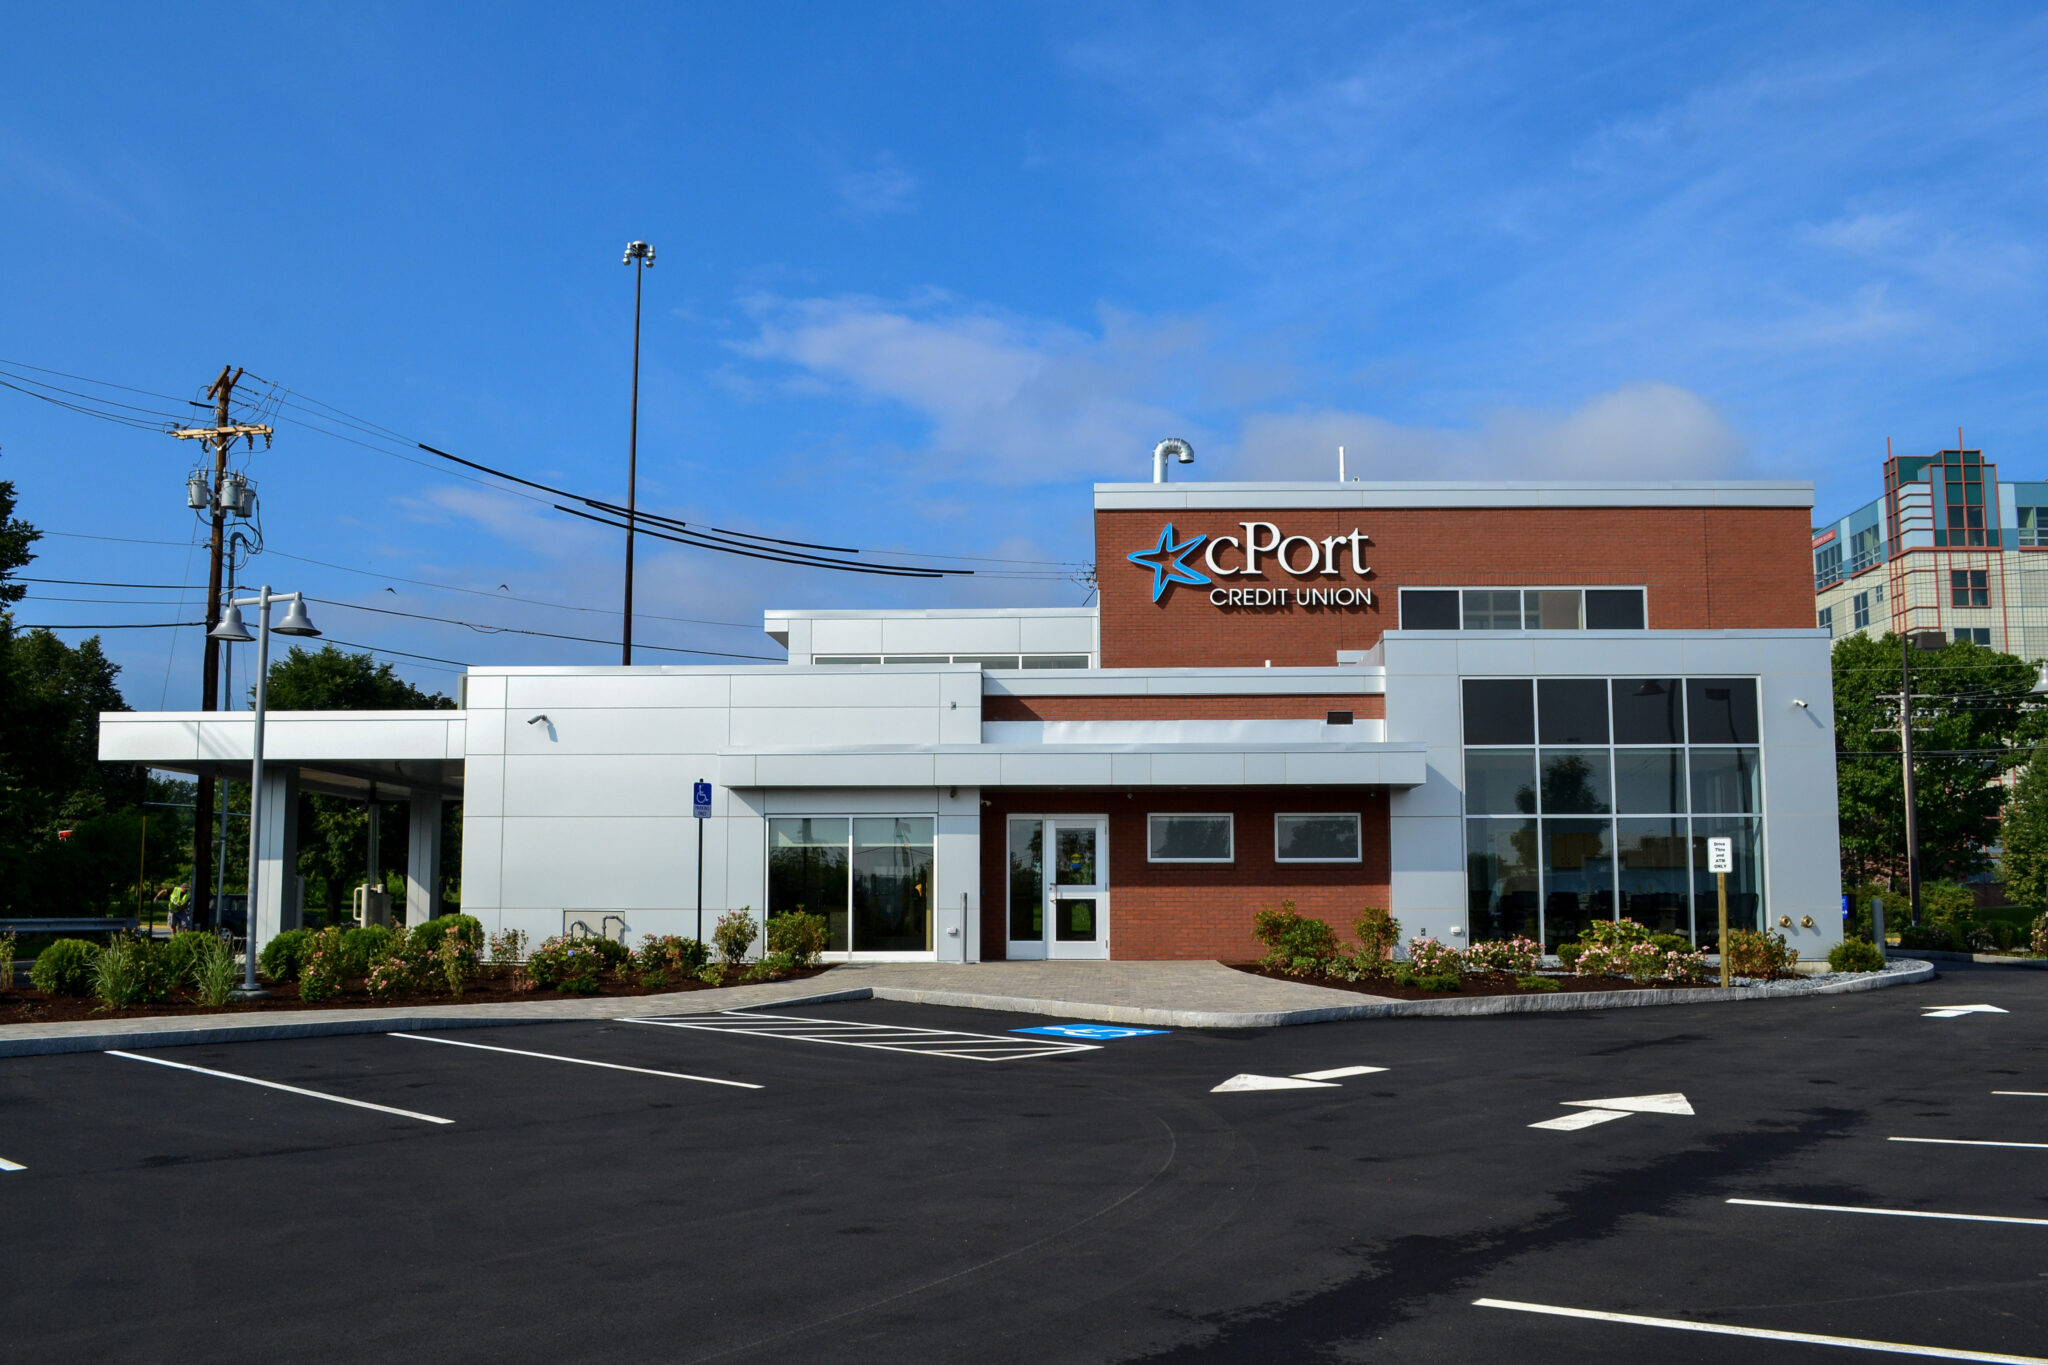 Photo of cPort Credit Union in Portland, Maine. This is our Forest Avenue branch.